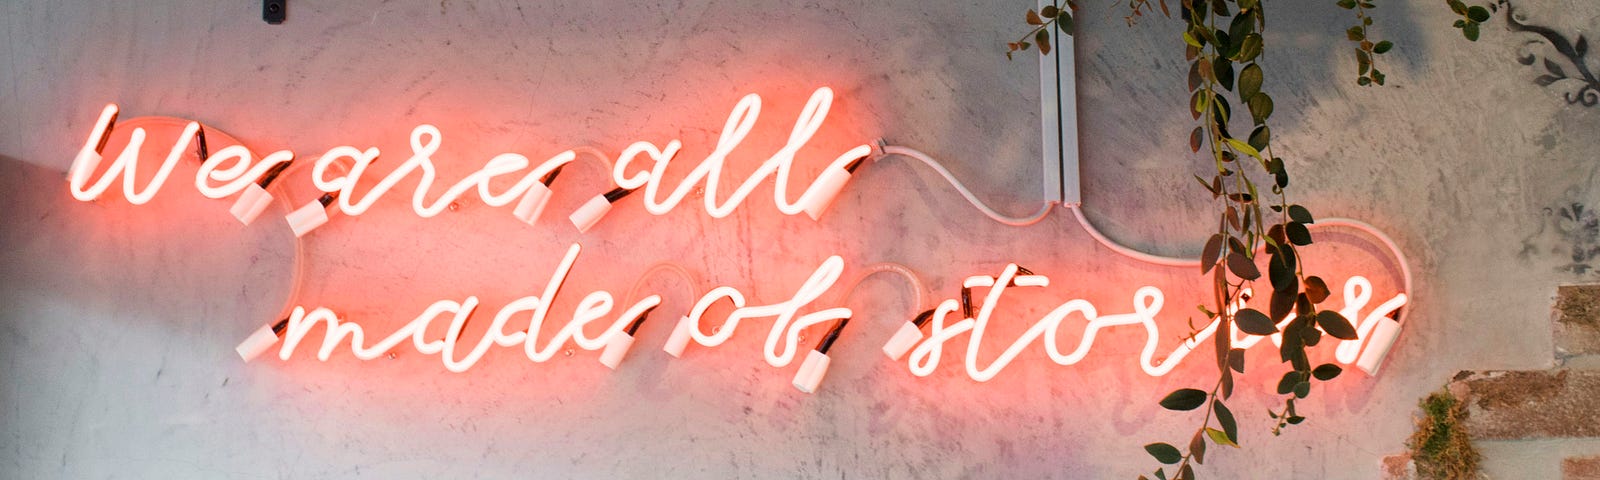 neon sign under bookshelf saying “We are all made of stories”